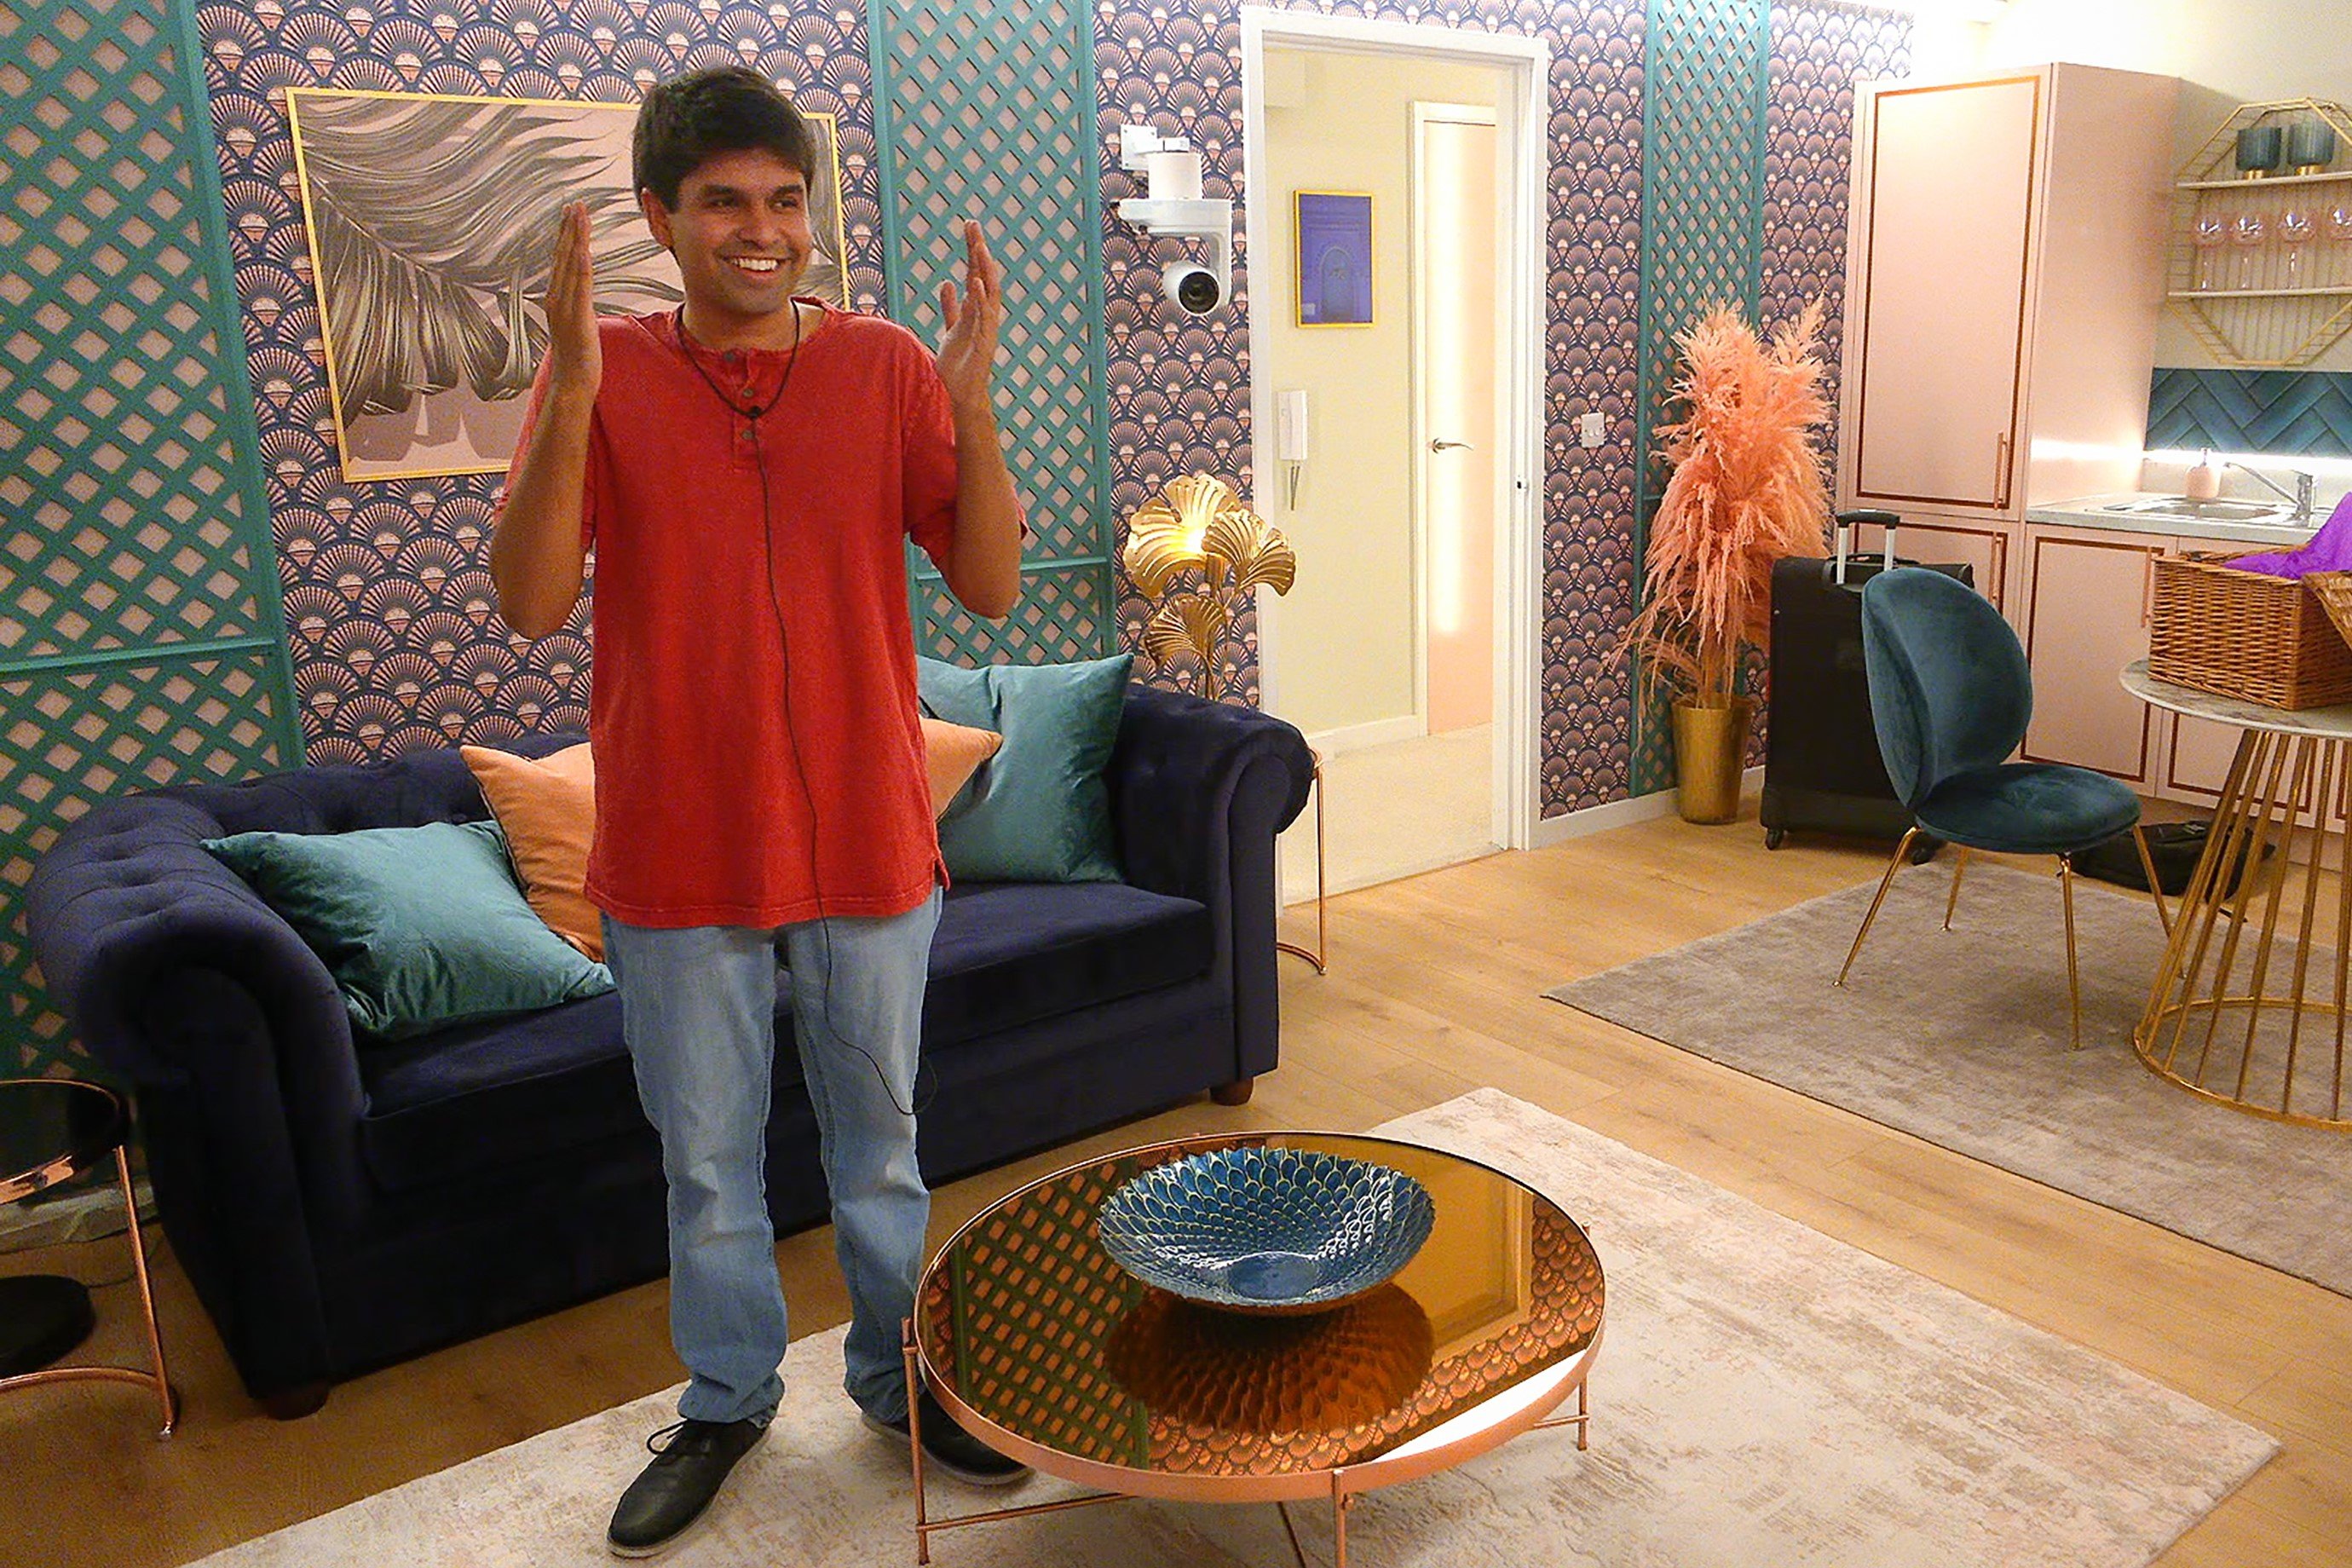 Shubham Goel, who came in second place in 'The Circle' Season 1, wears a red shirt and jeans.